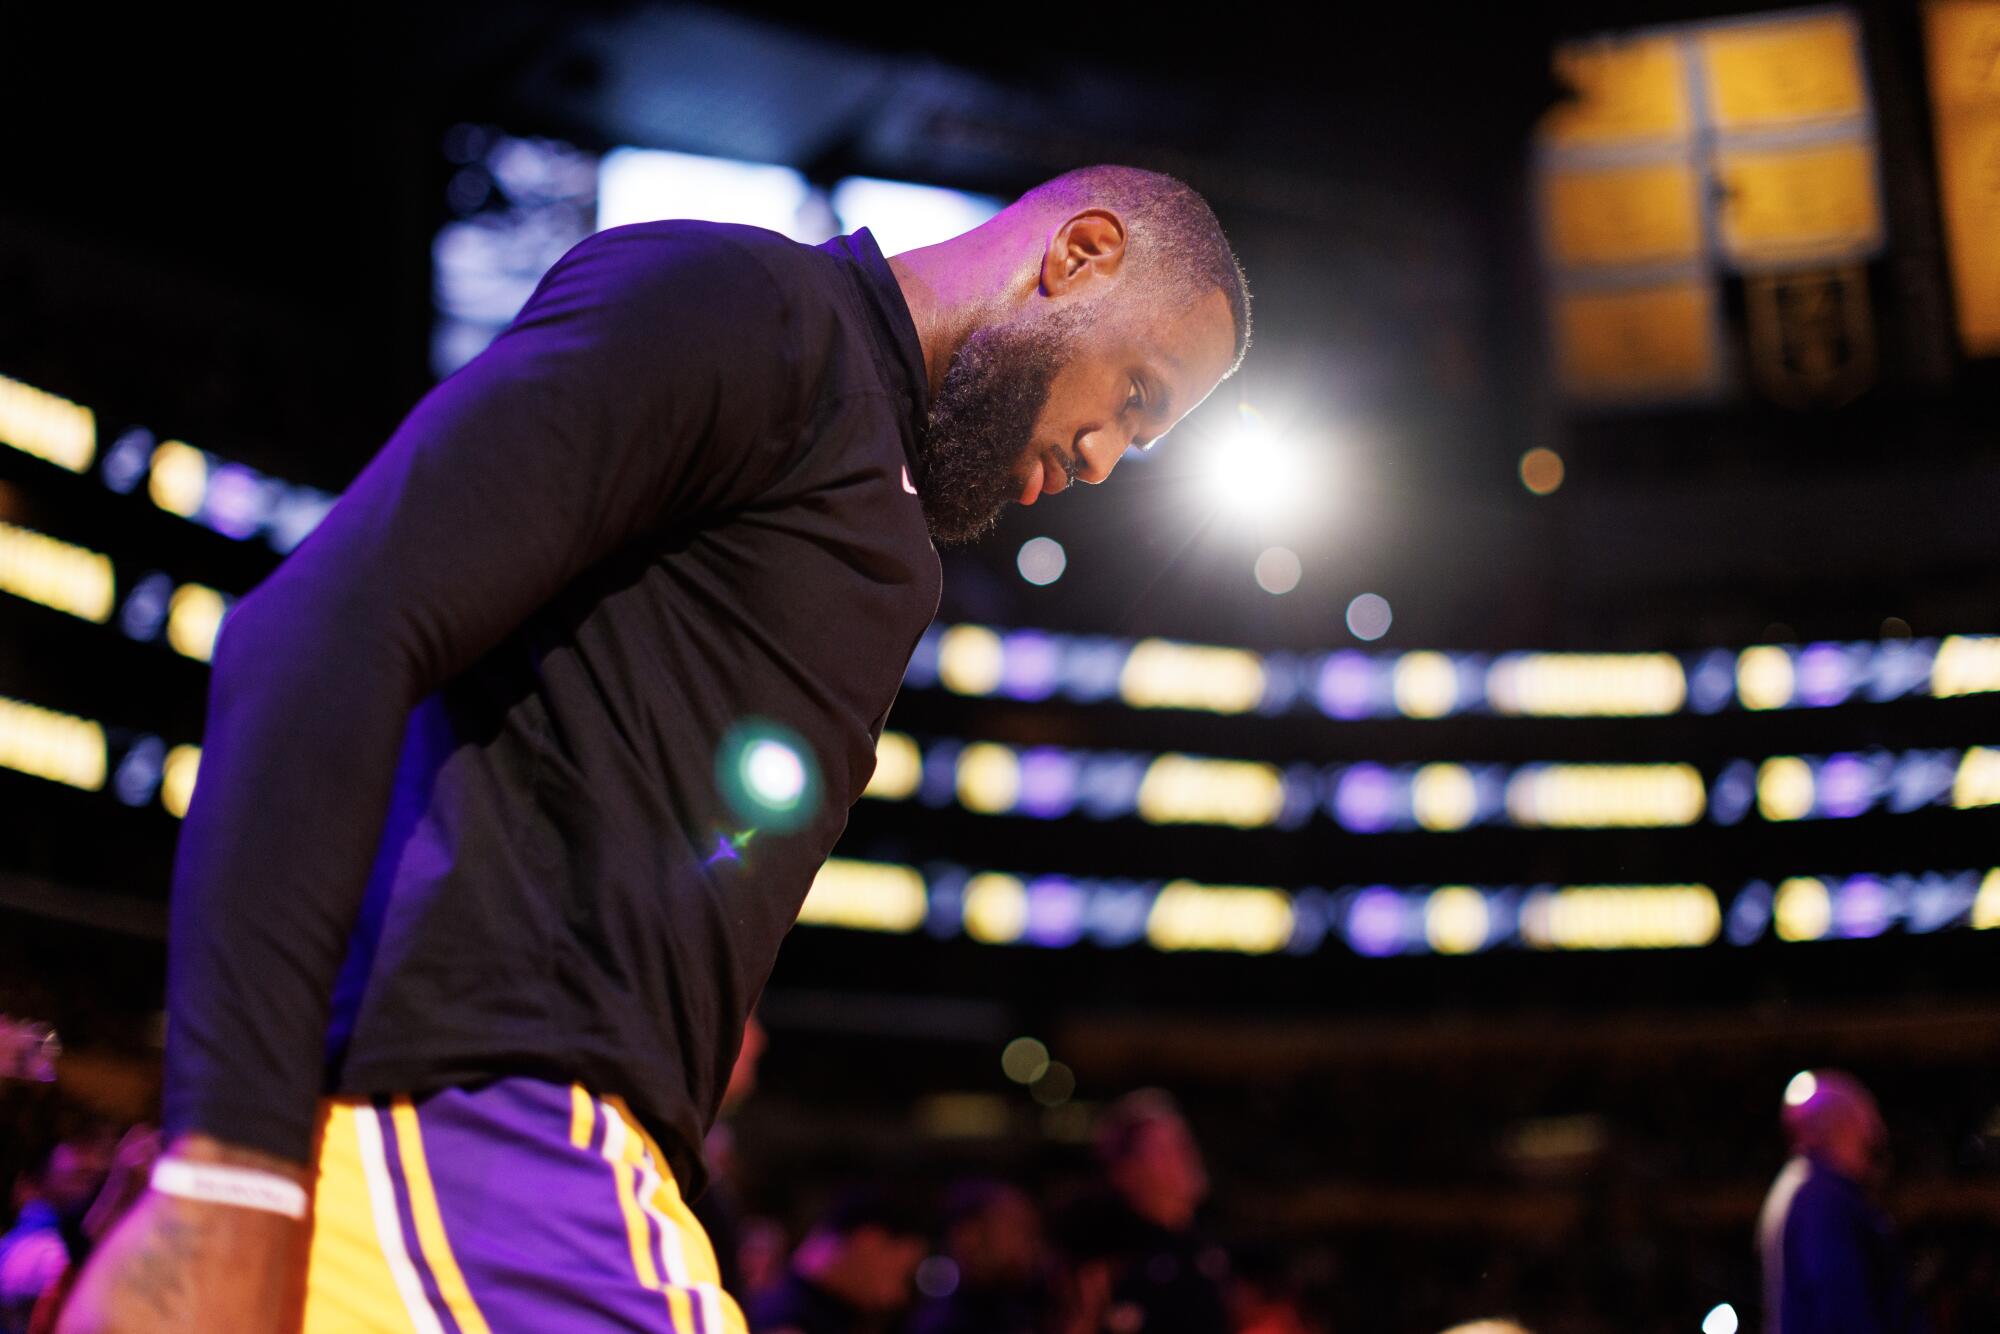 Lakers star LeBron James is introduced before a game against the Detroit Pistons on Feb. 13.